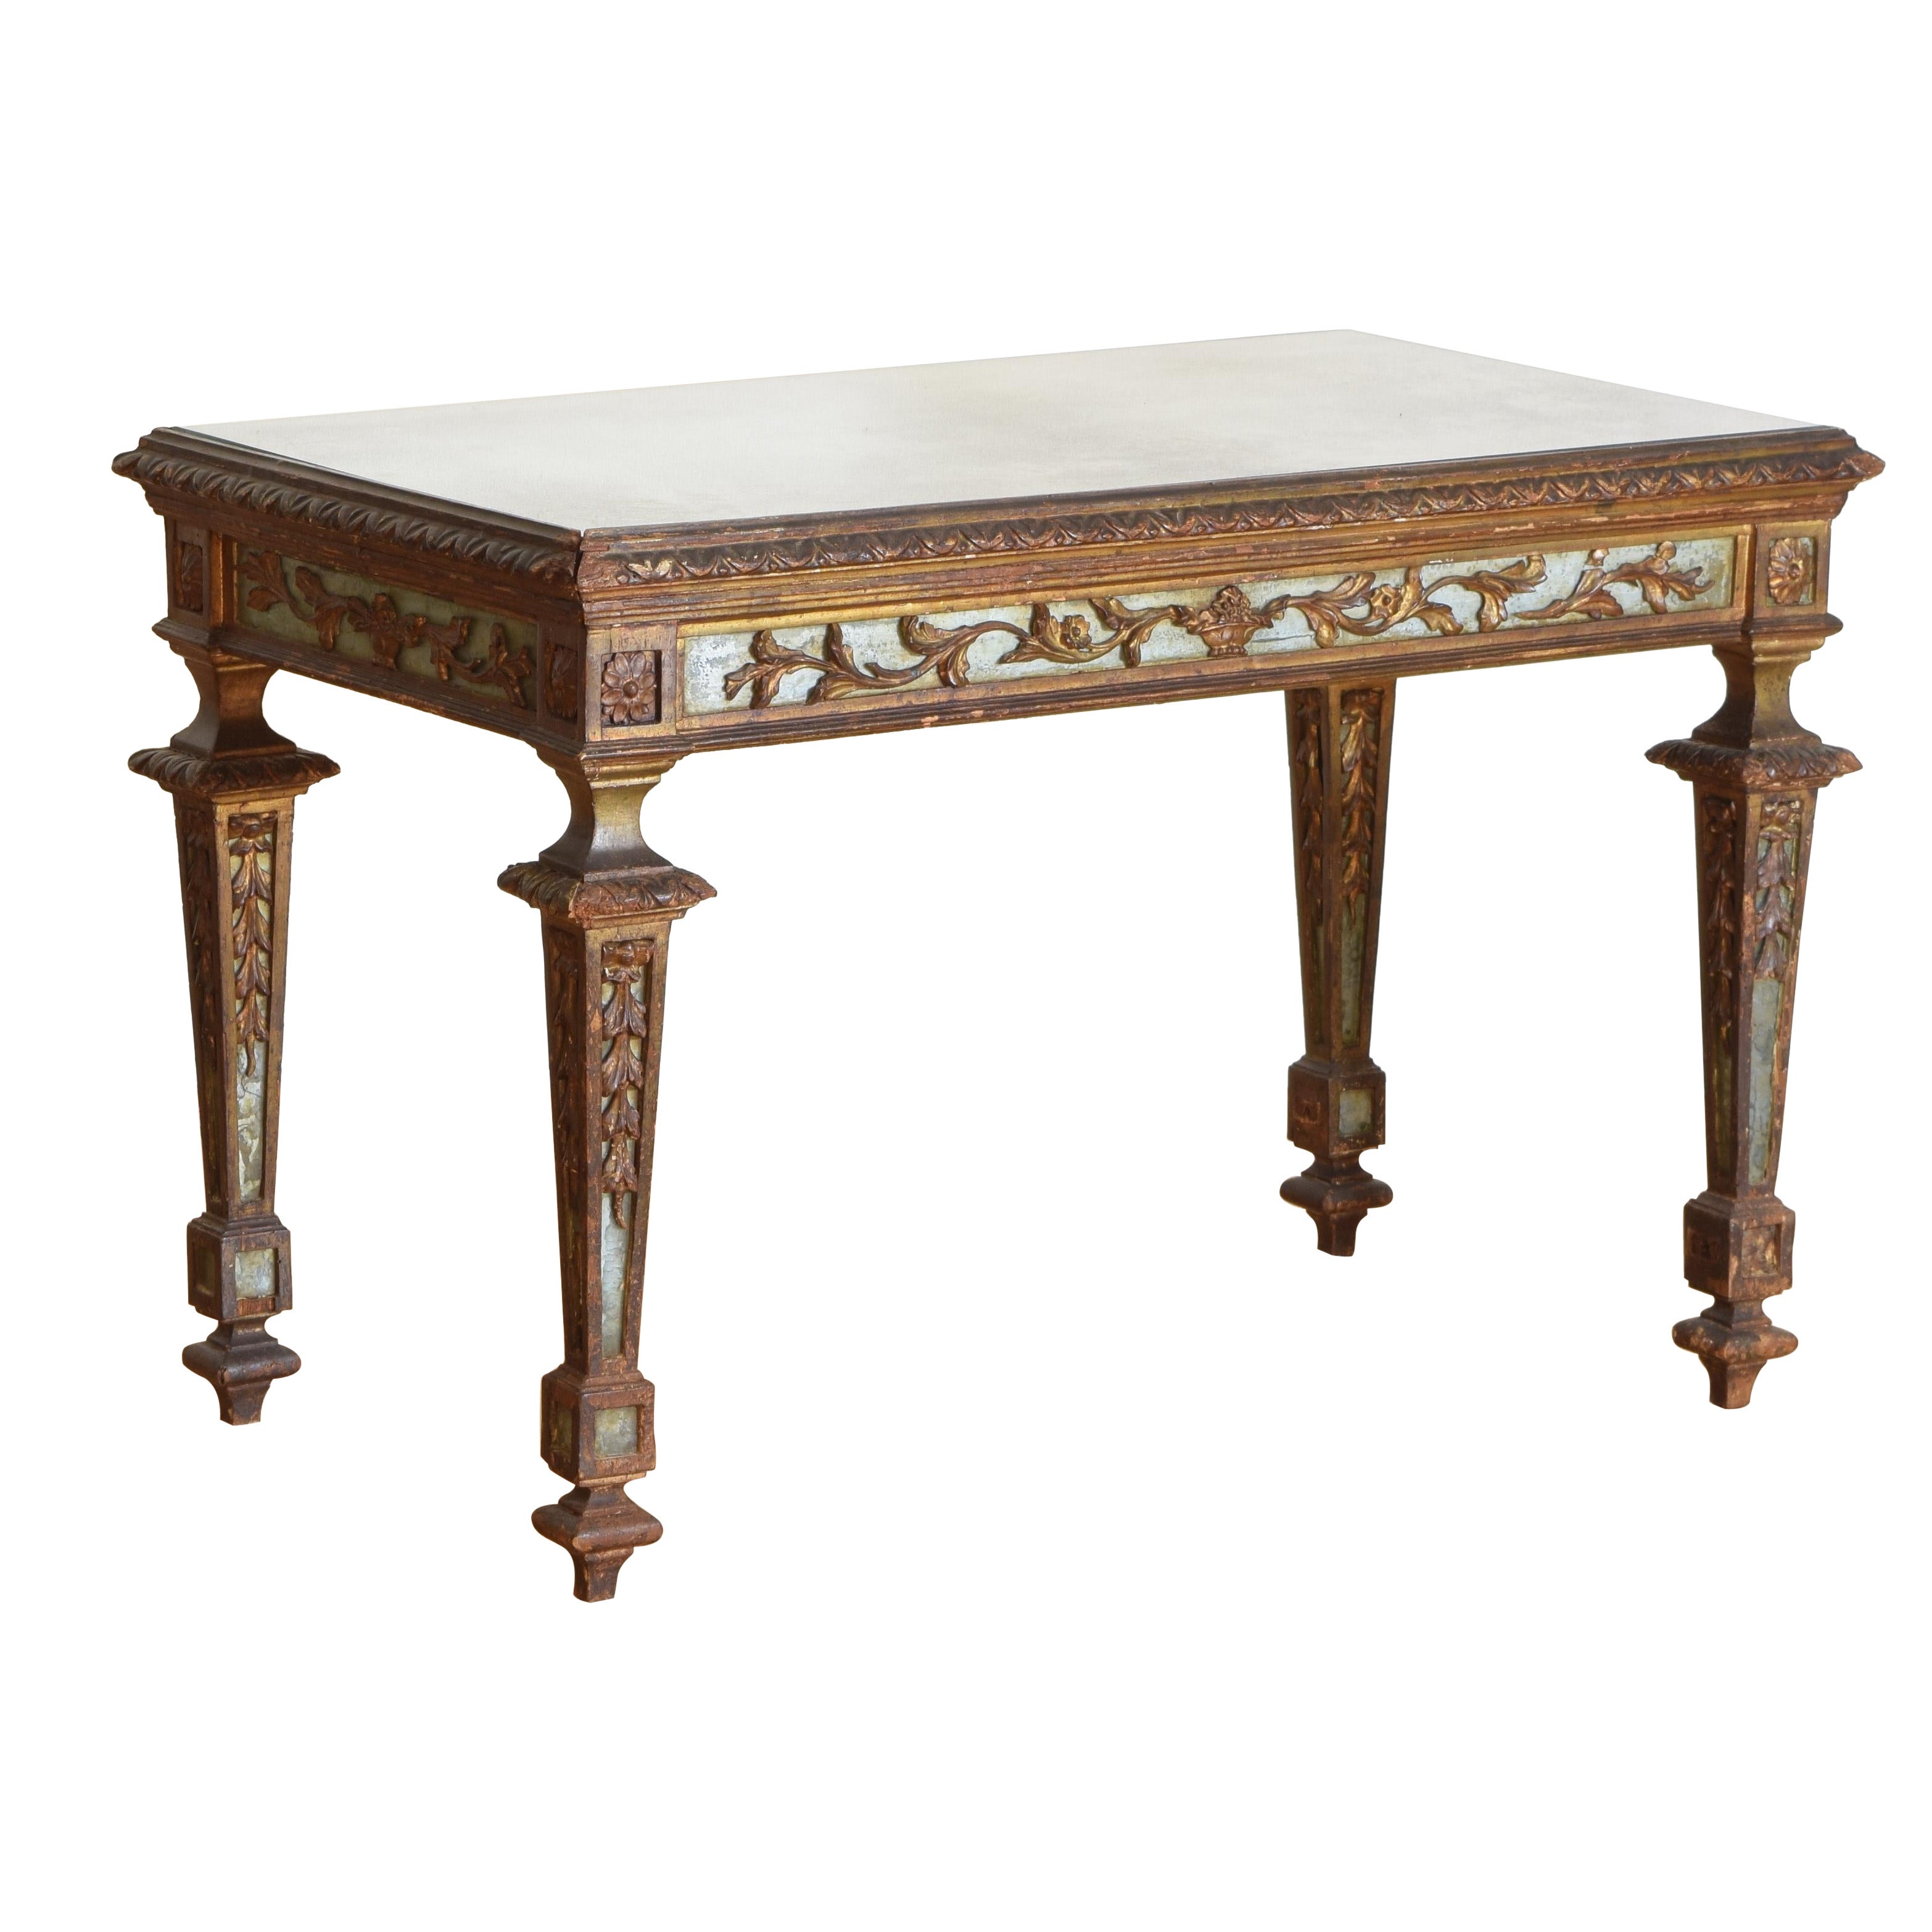 19th C. Italian Louis XVI Style Giltwood, Painted and Mirrored Table